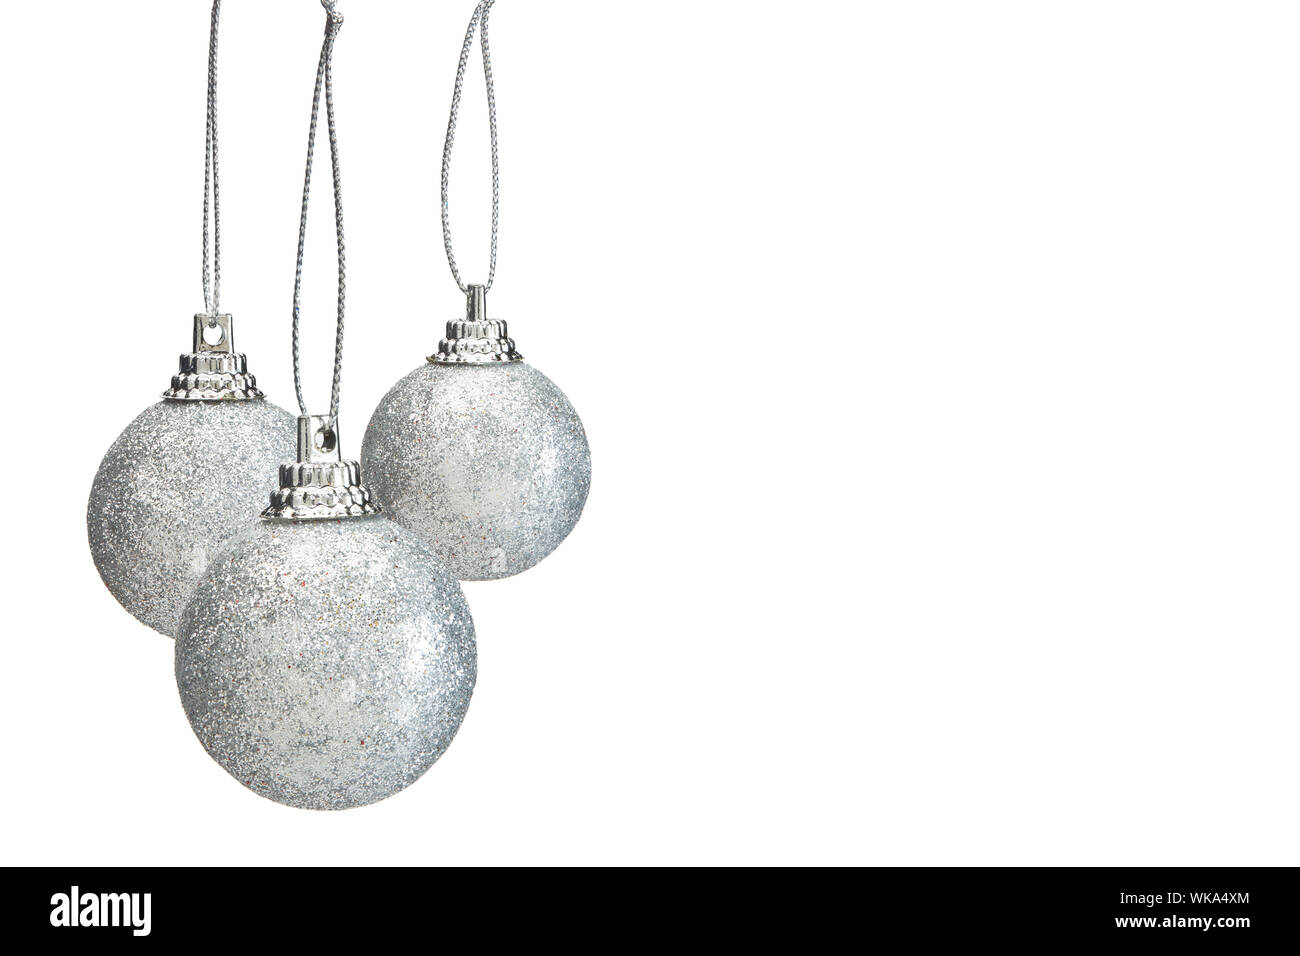 Christmas Decorations Hanging Over White Background Stock Photo